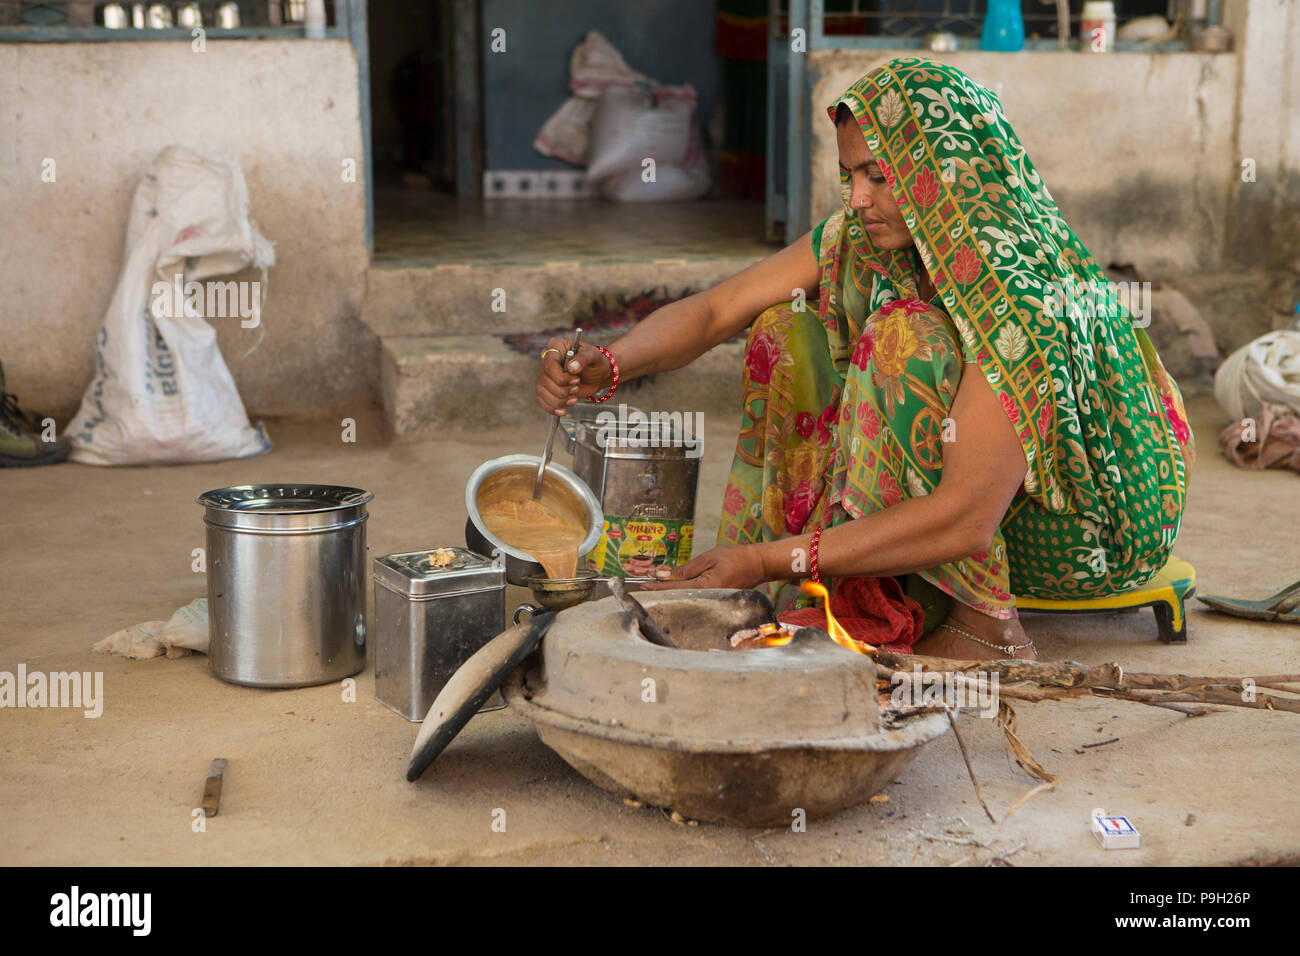 A woman making Indian chai on an open wood fire at their home in Ahmedabad, India. Stock Photo